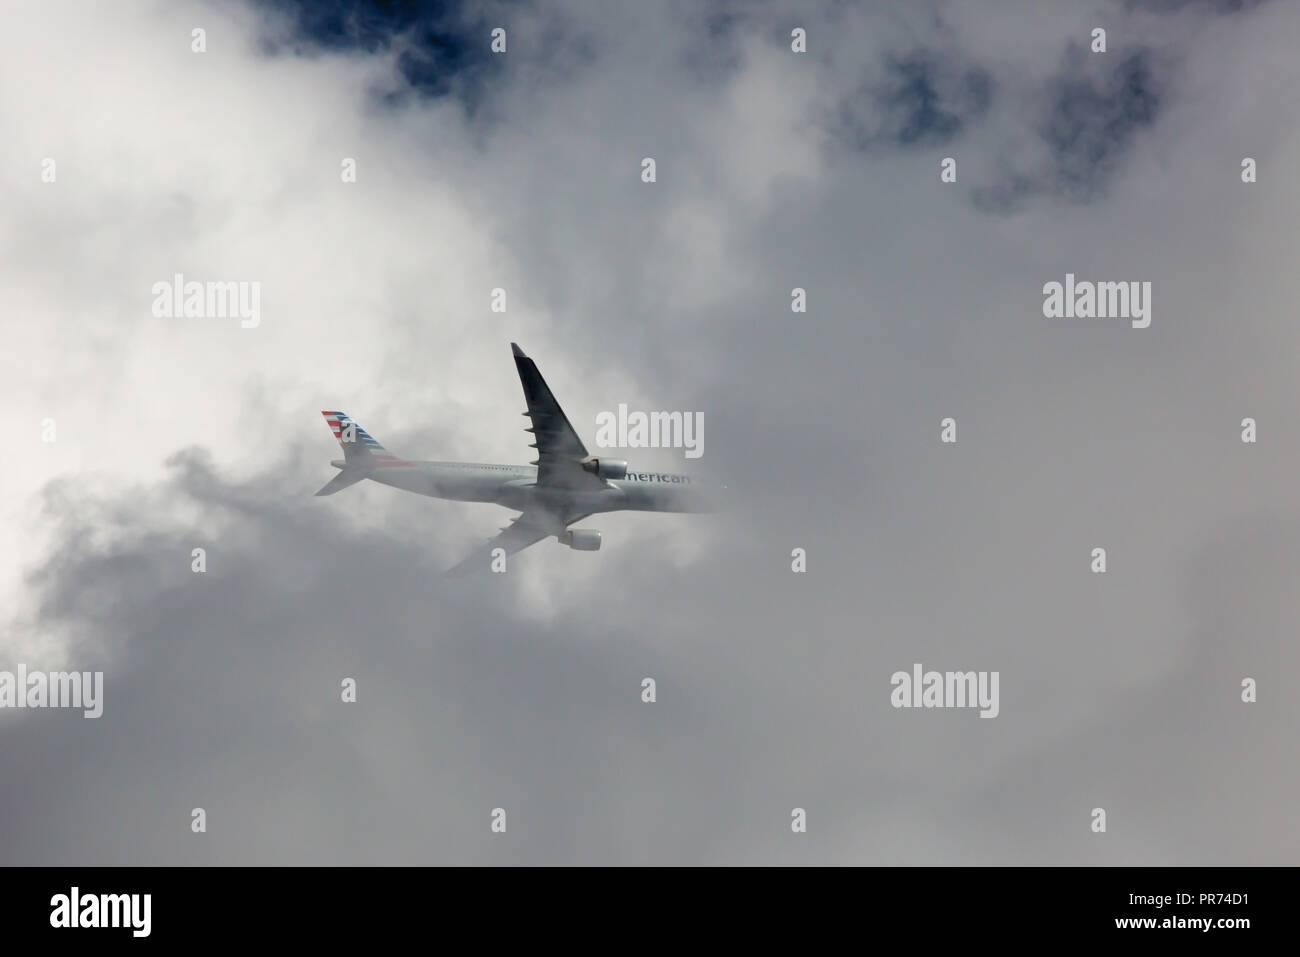 CHARLOTTE, NC (USA) - September 29, 2018: An American Airlines commercial jet navigates through storm clouds as it approaches an airport. Stock Photo